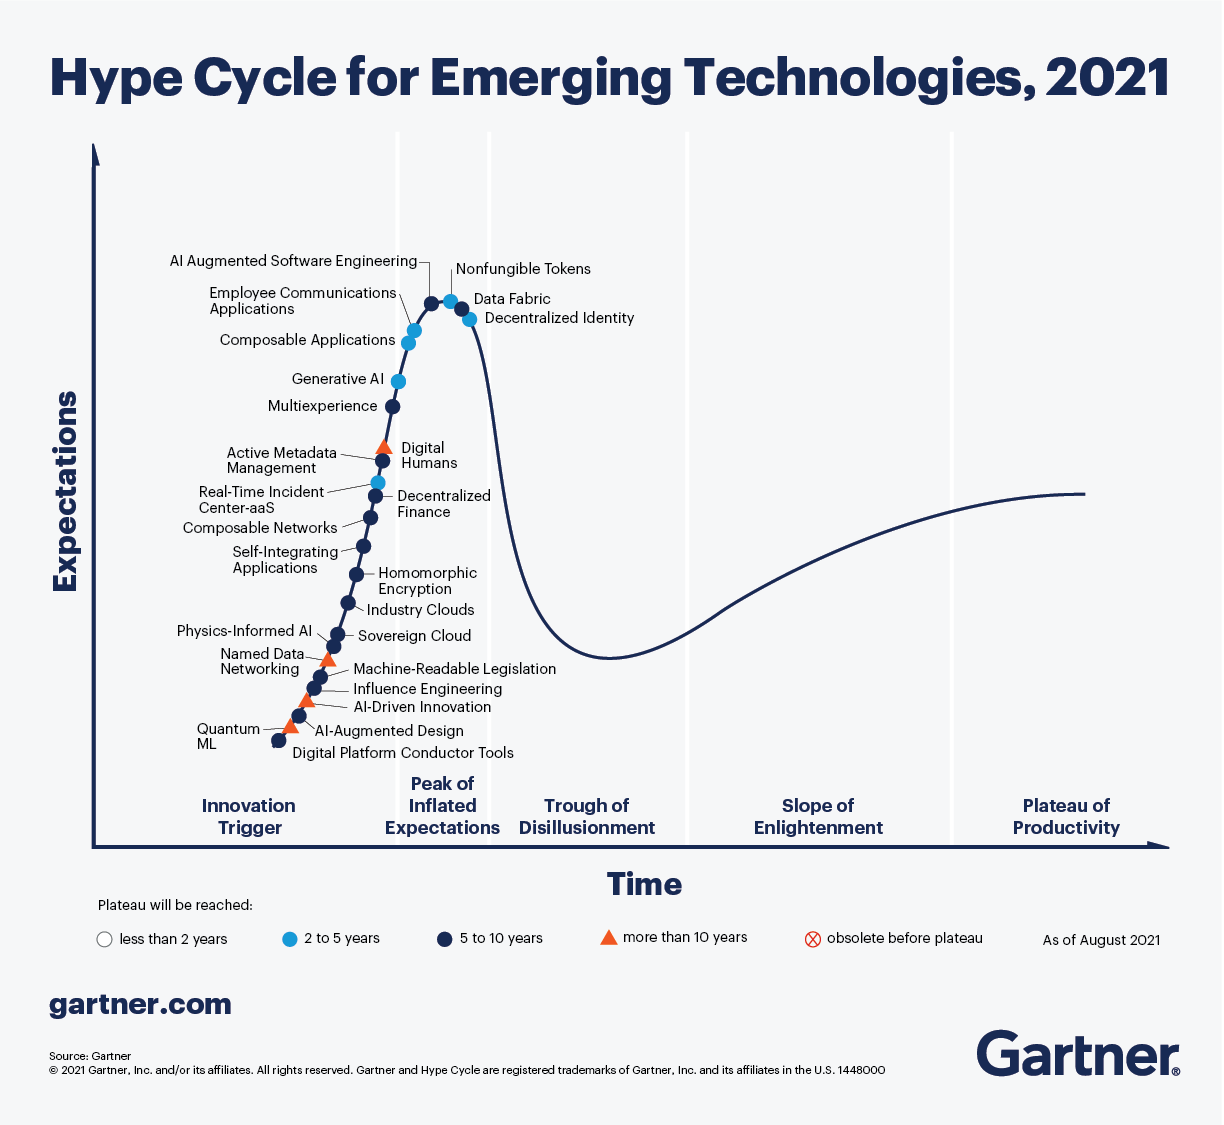 Gartner Hype Cycle for Emerging Technologies 2021, showing self-integrating applications in the Innovation Trigger quadrant, with Plateau of productivity to be reached in 5 to 10 years.